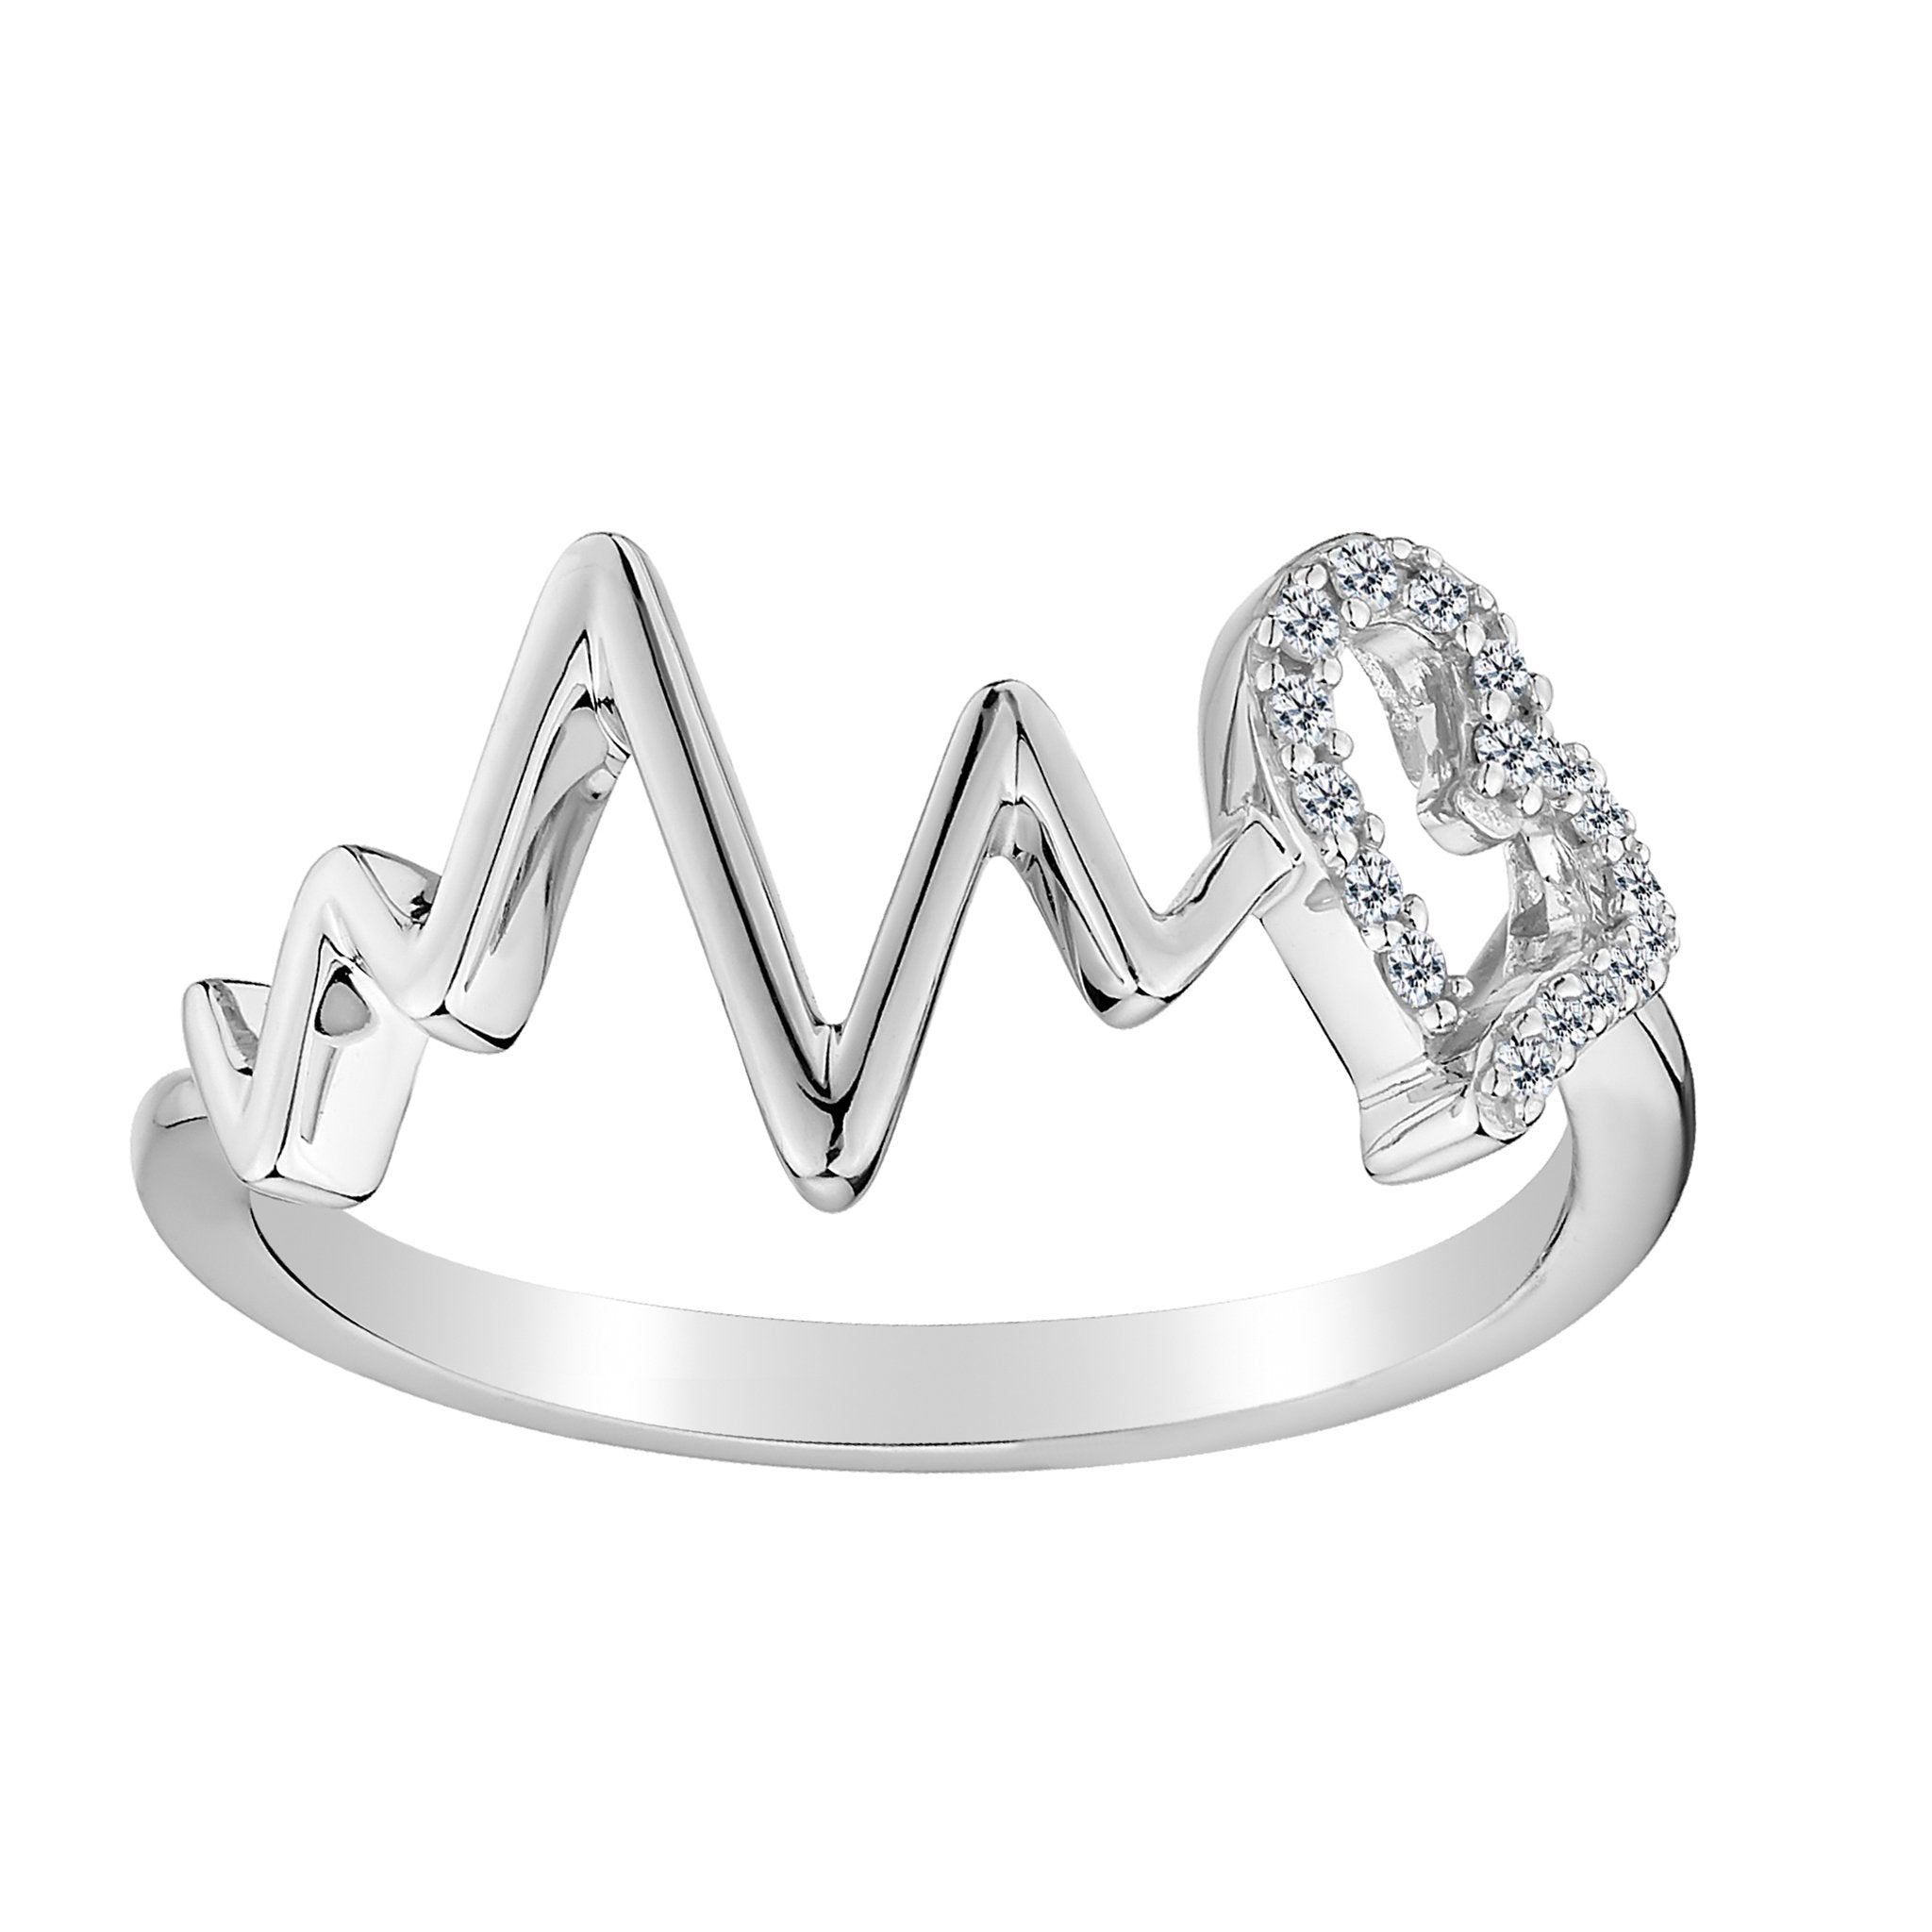 .10 CARAT DIAMOND "HEART BEAT" RING, 10kt WHITE GOLD. Fashion Rings - Griffin Jewellery Designs